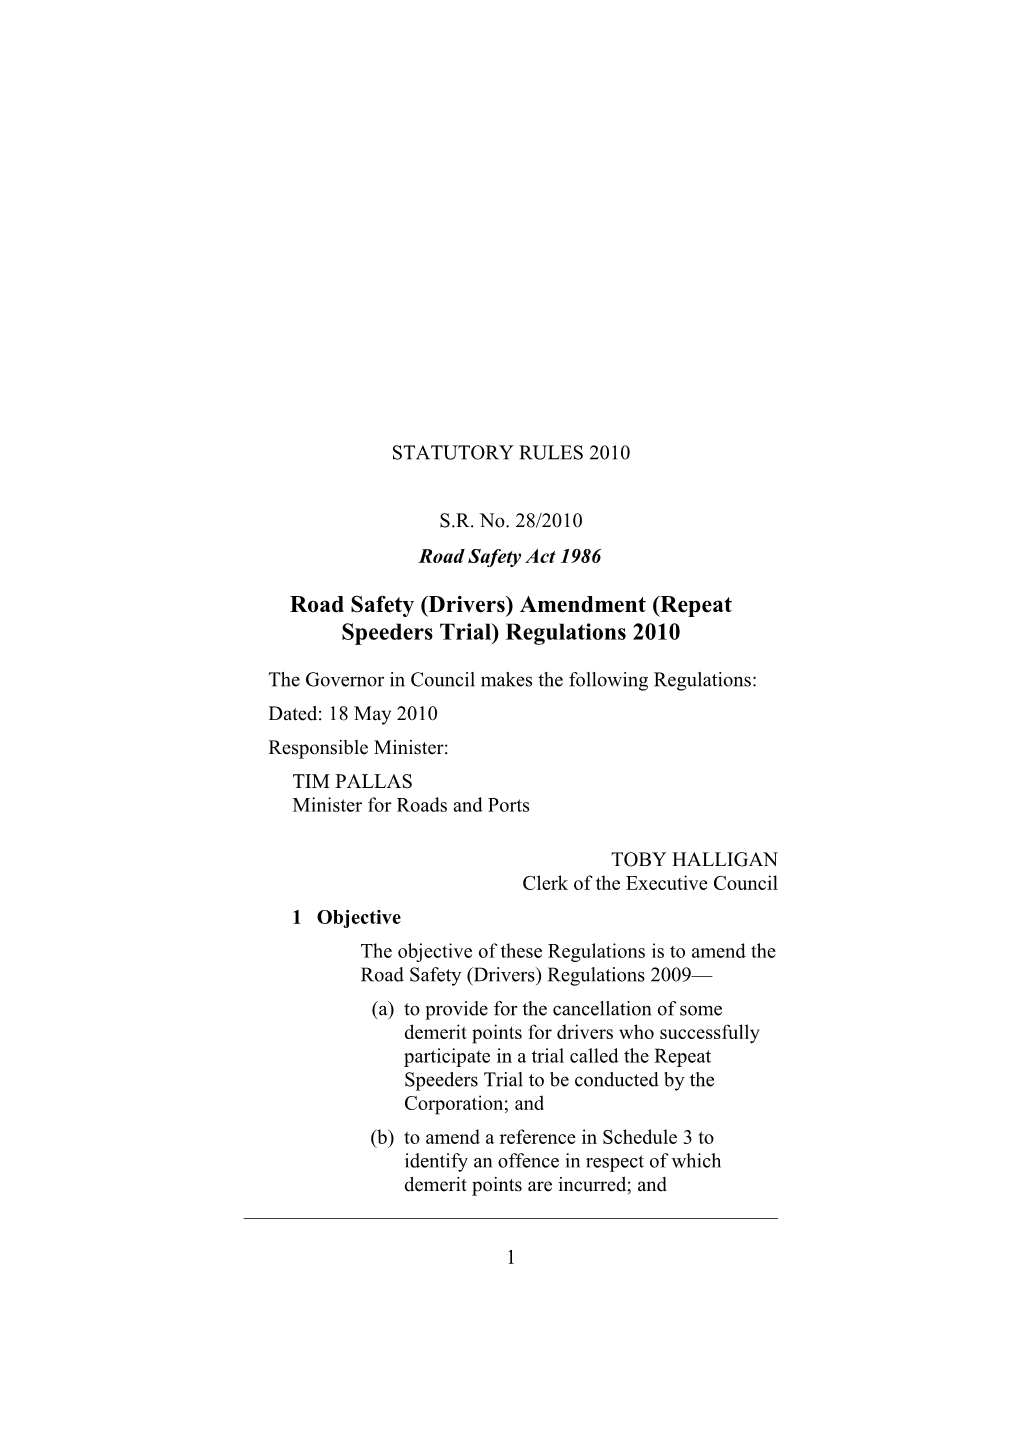 Road Safety (Drivers) Amendment (Repeat Speeders Trial) Regulations 2010